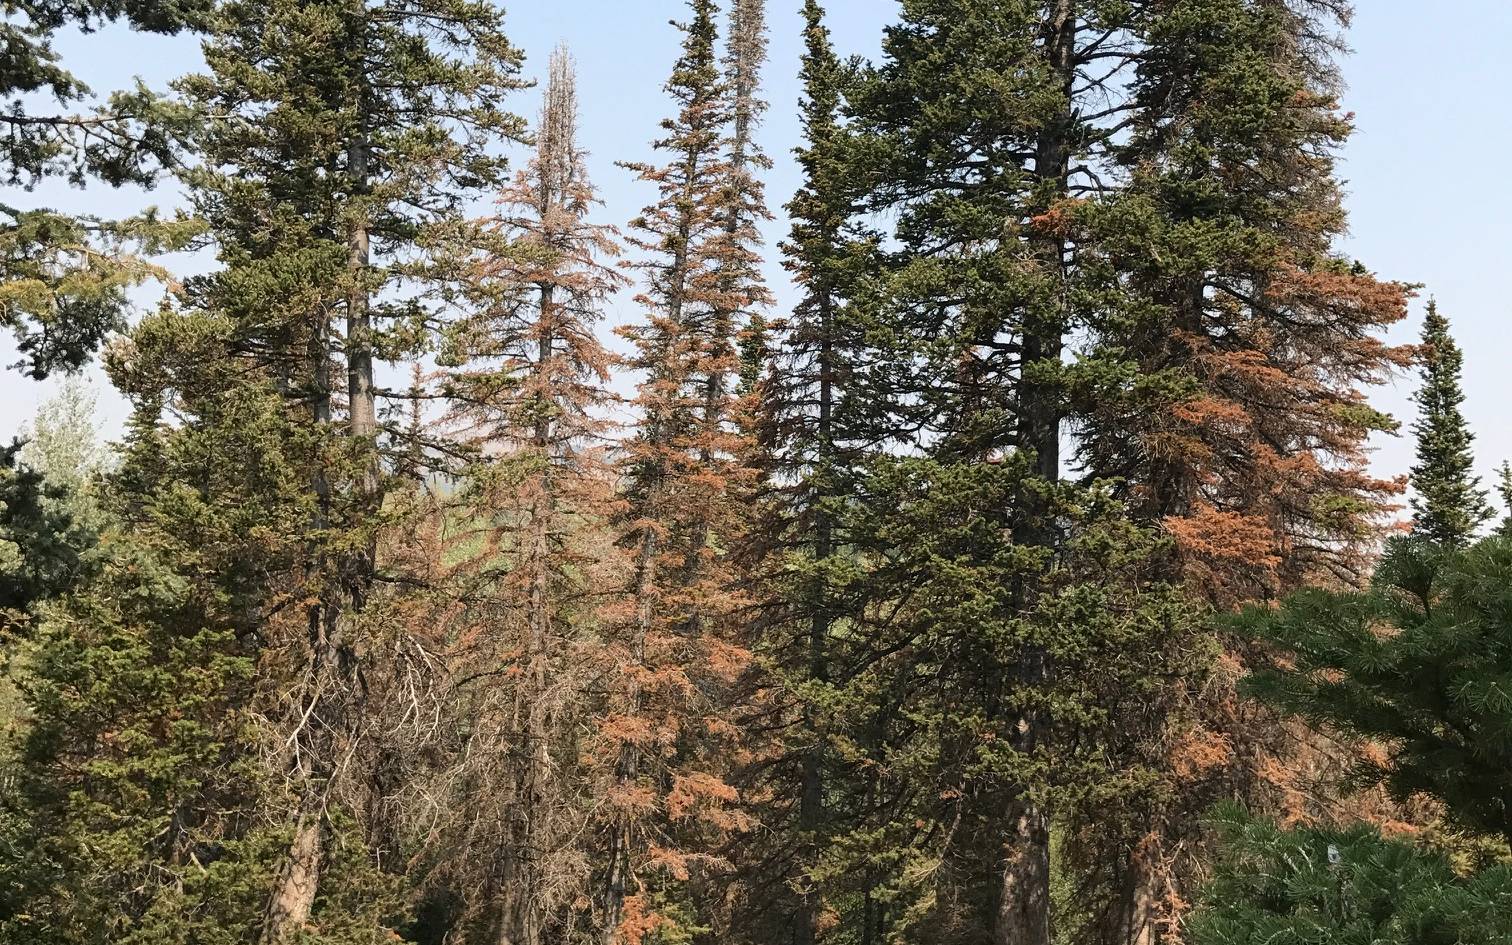 Subalpine Fir Stand in Farmington Canyon, UT, Infested With Balsam Woolly Adelgid